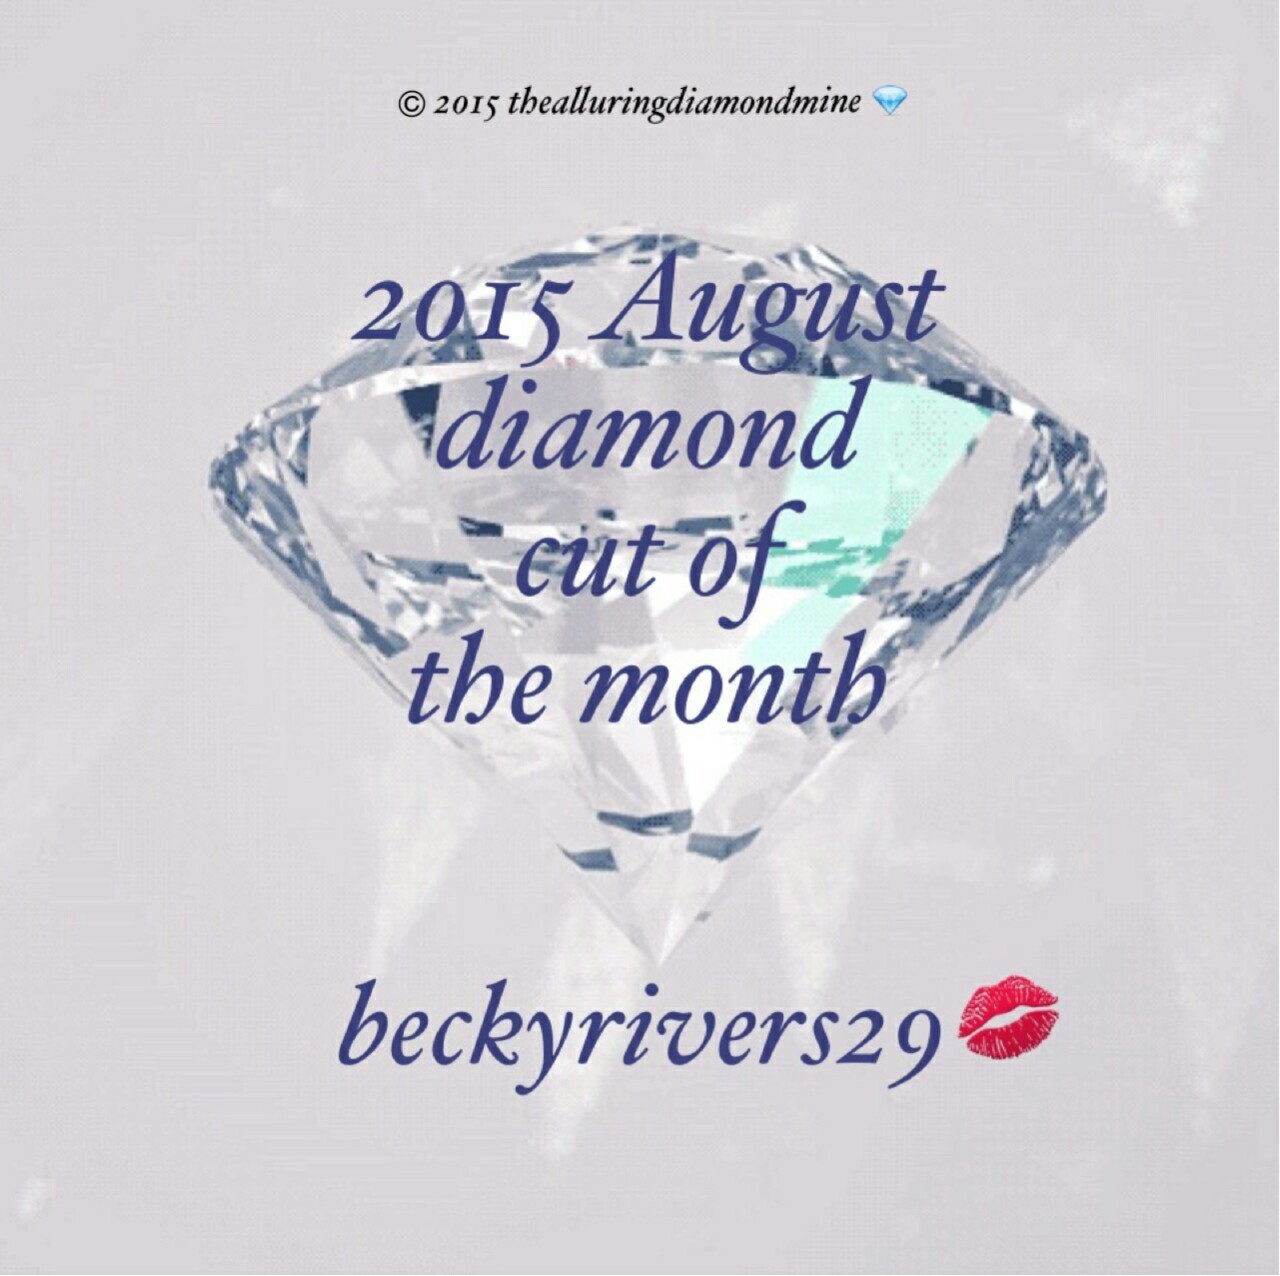 thealluringdiamondmine:  thealluringdiamondmine: The Diamond Cut Of The Month For